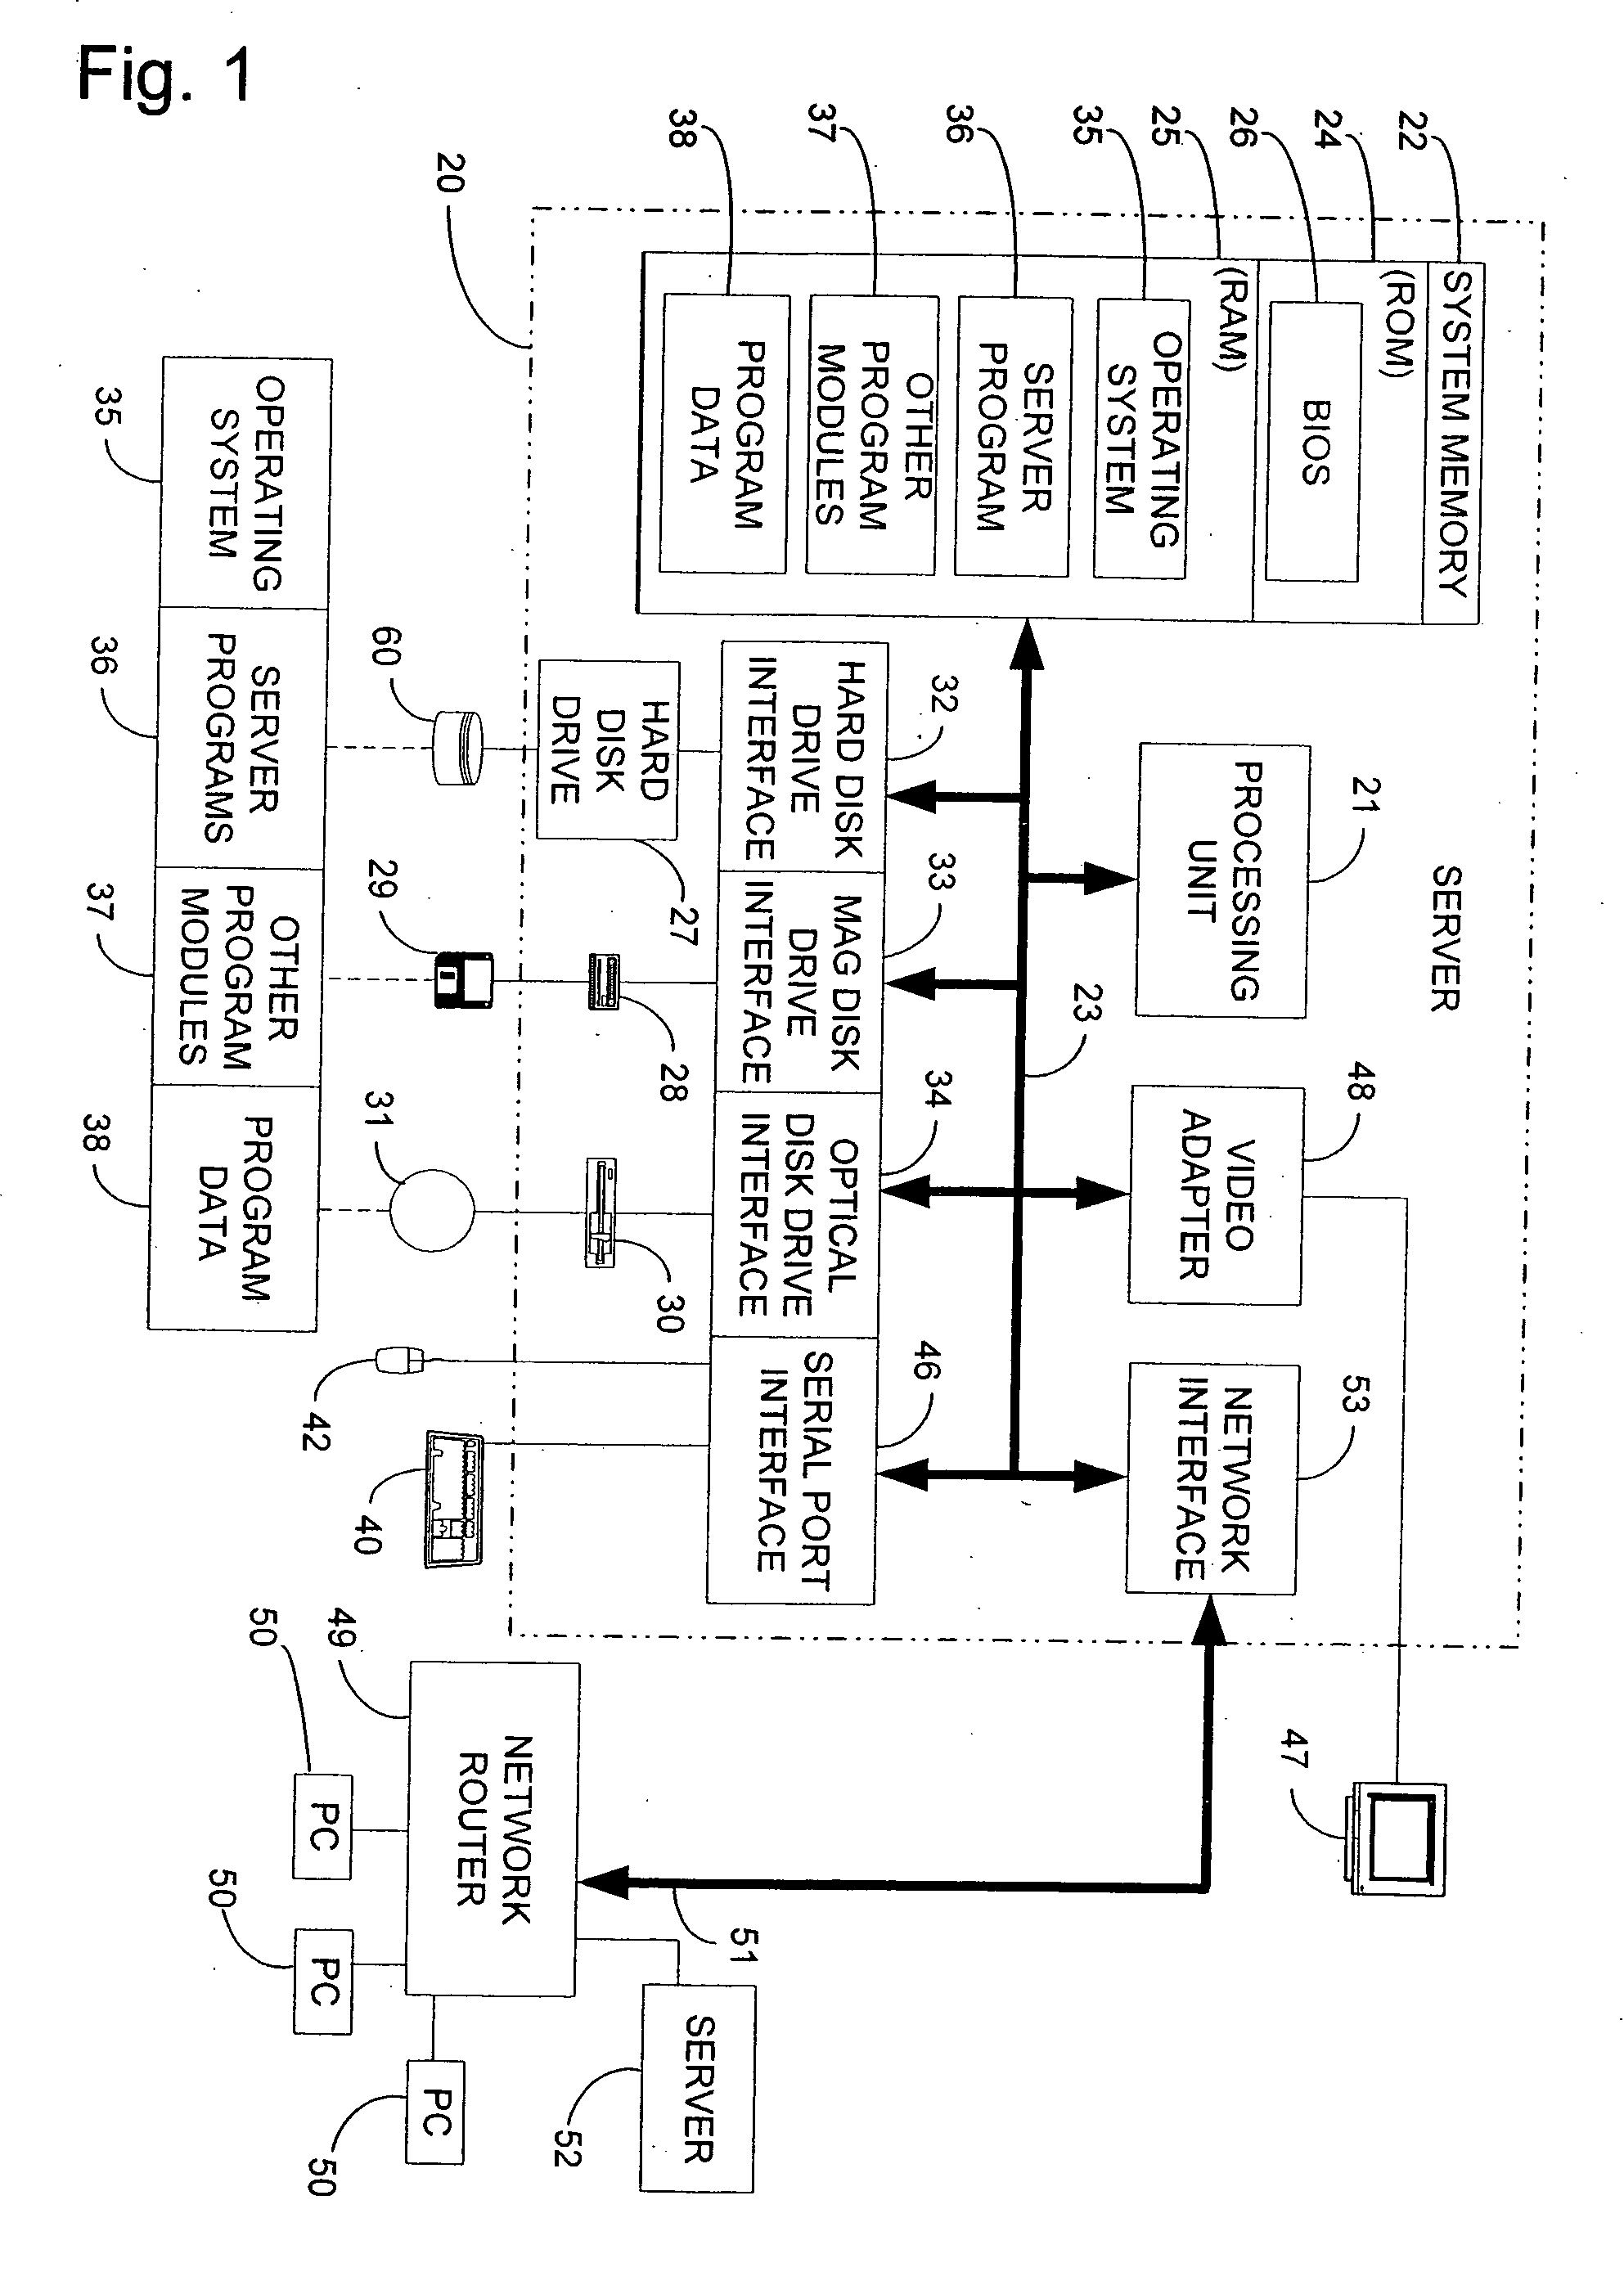 Time-window-constrained multicast using connection scheduling